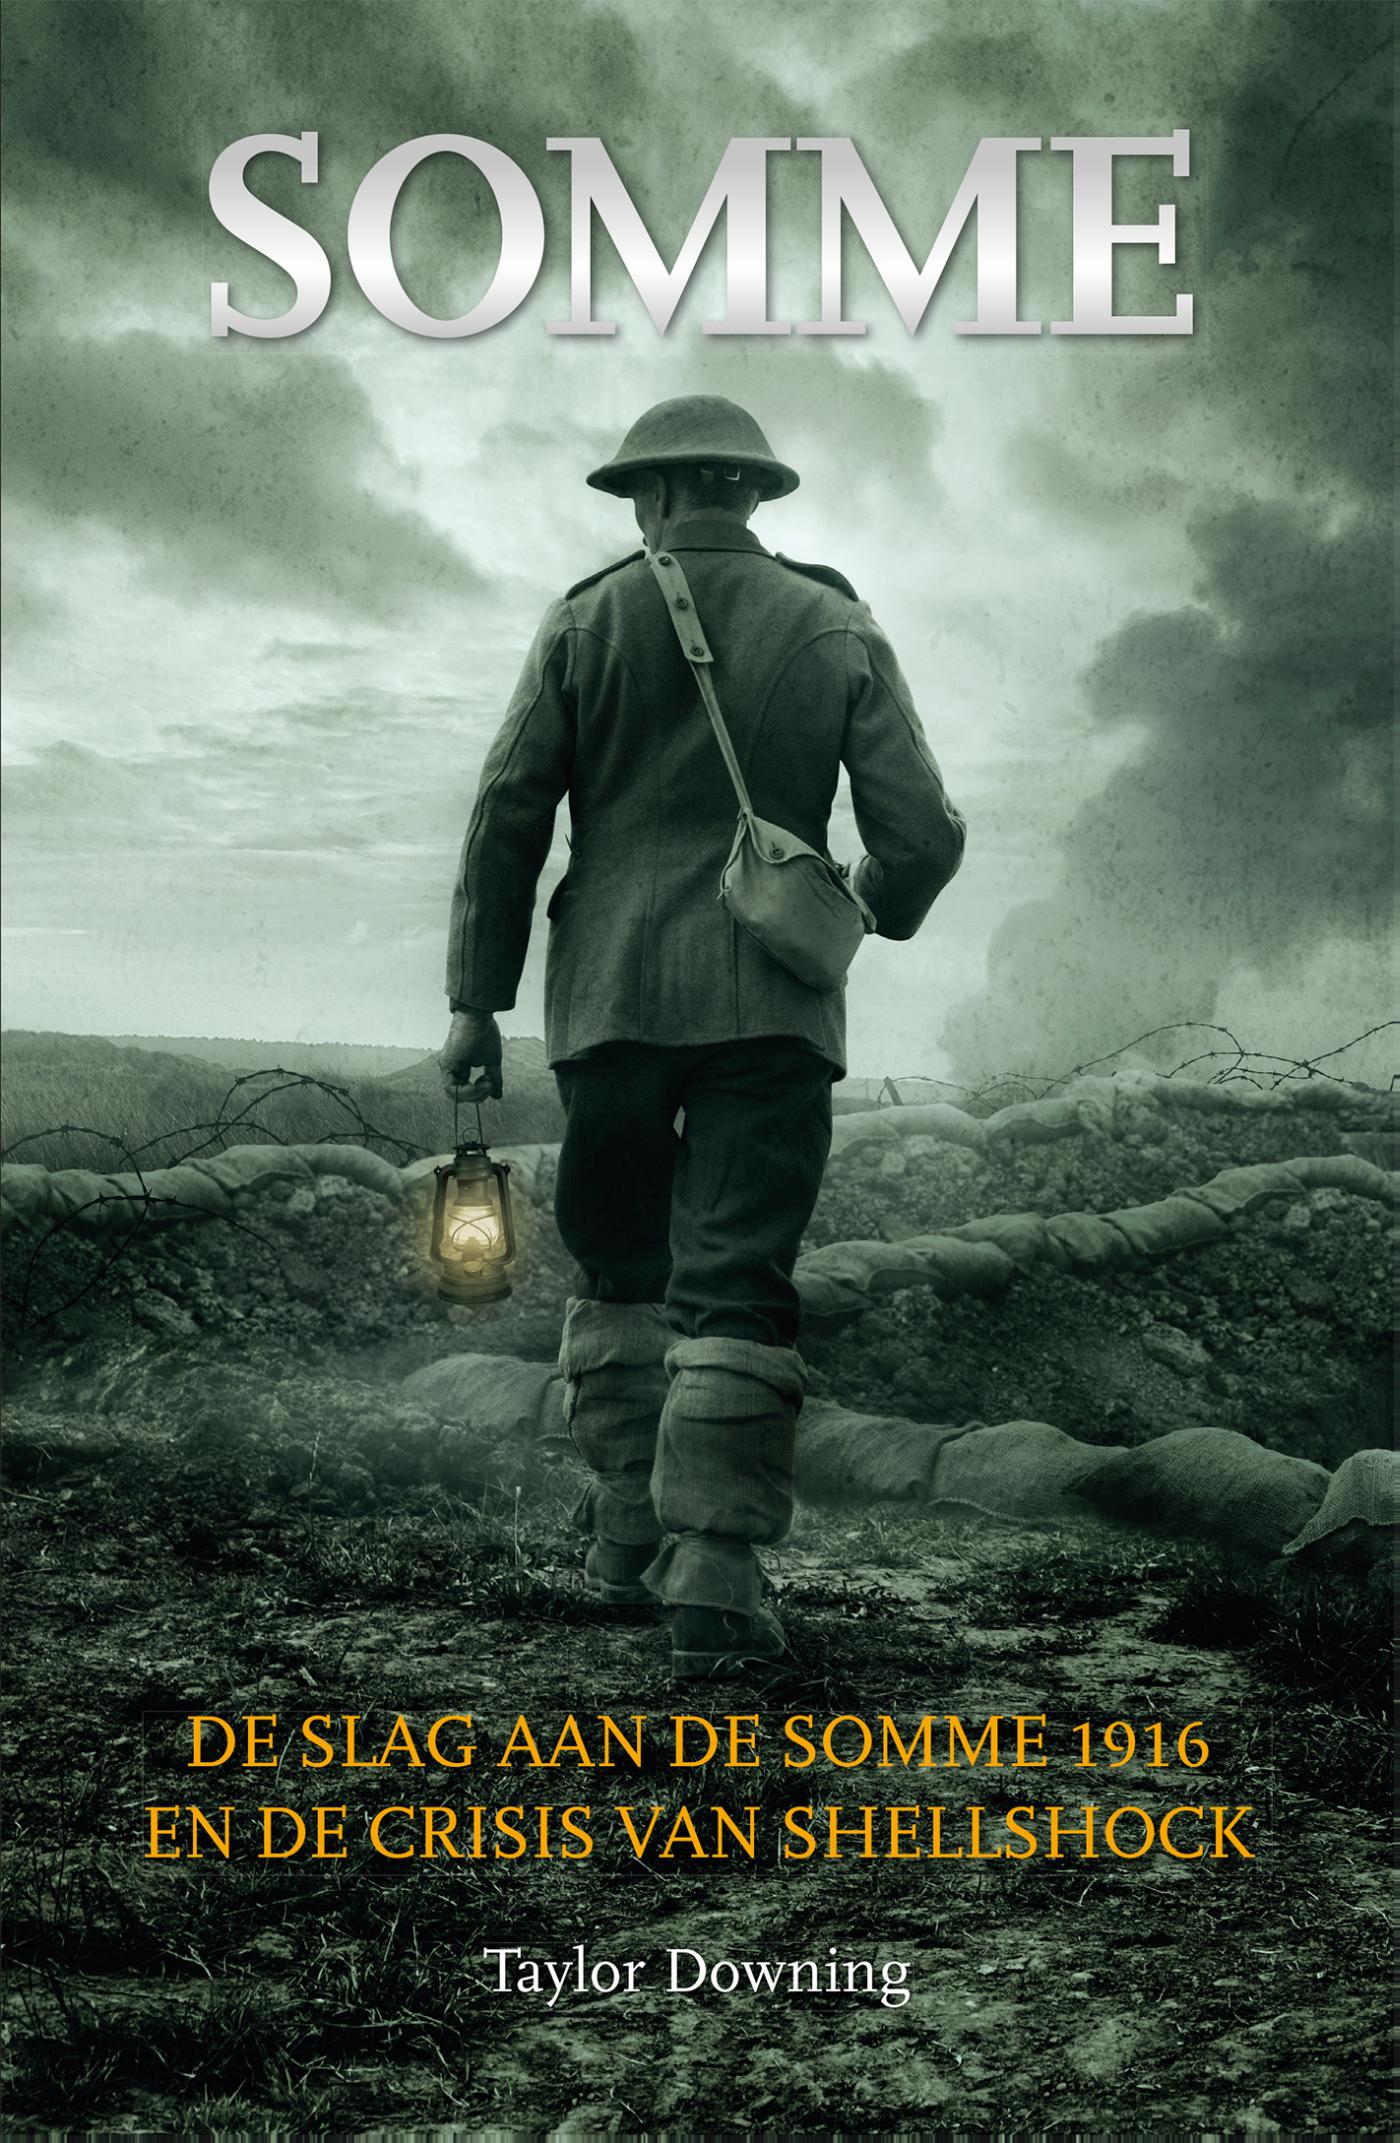 Somme (Ebook)